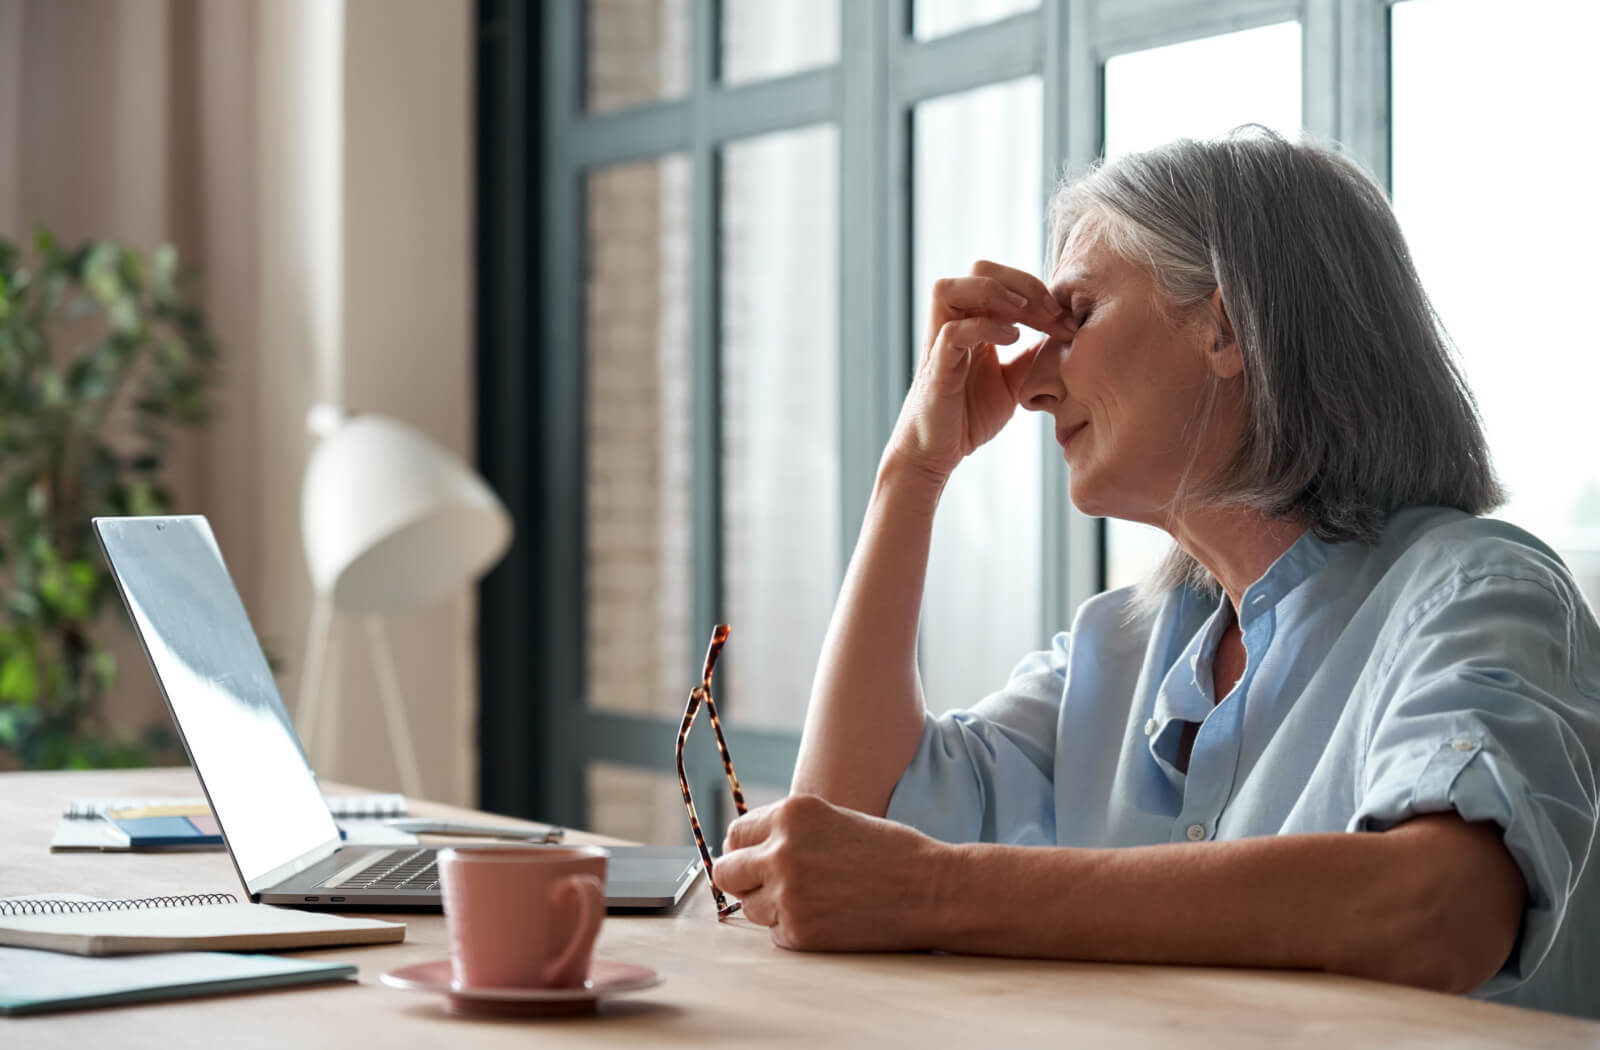 A senior woman sitting in front of her laptop computer takes off her eyeglasses and is suffering from dry eyes and a headache.